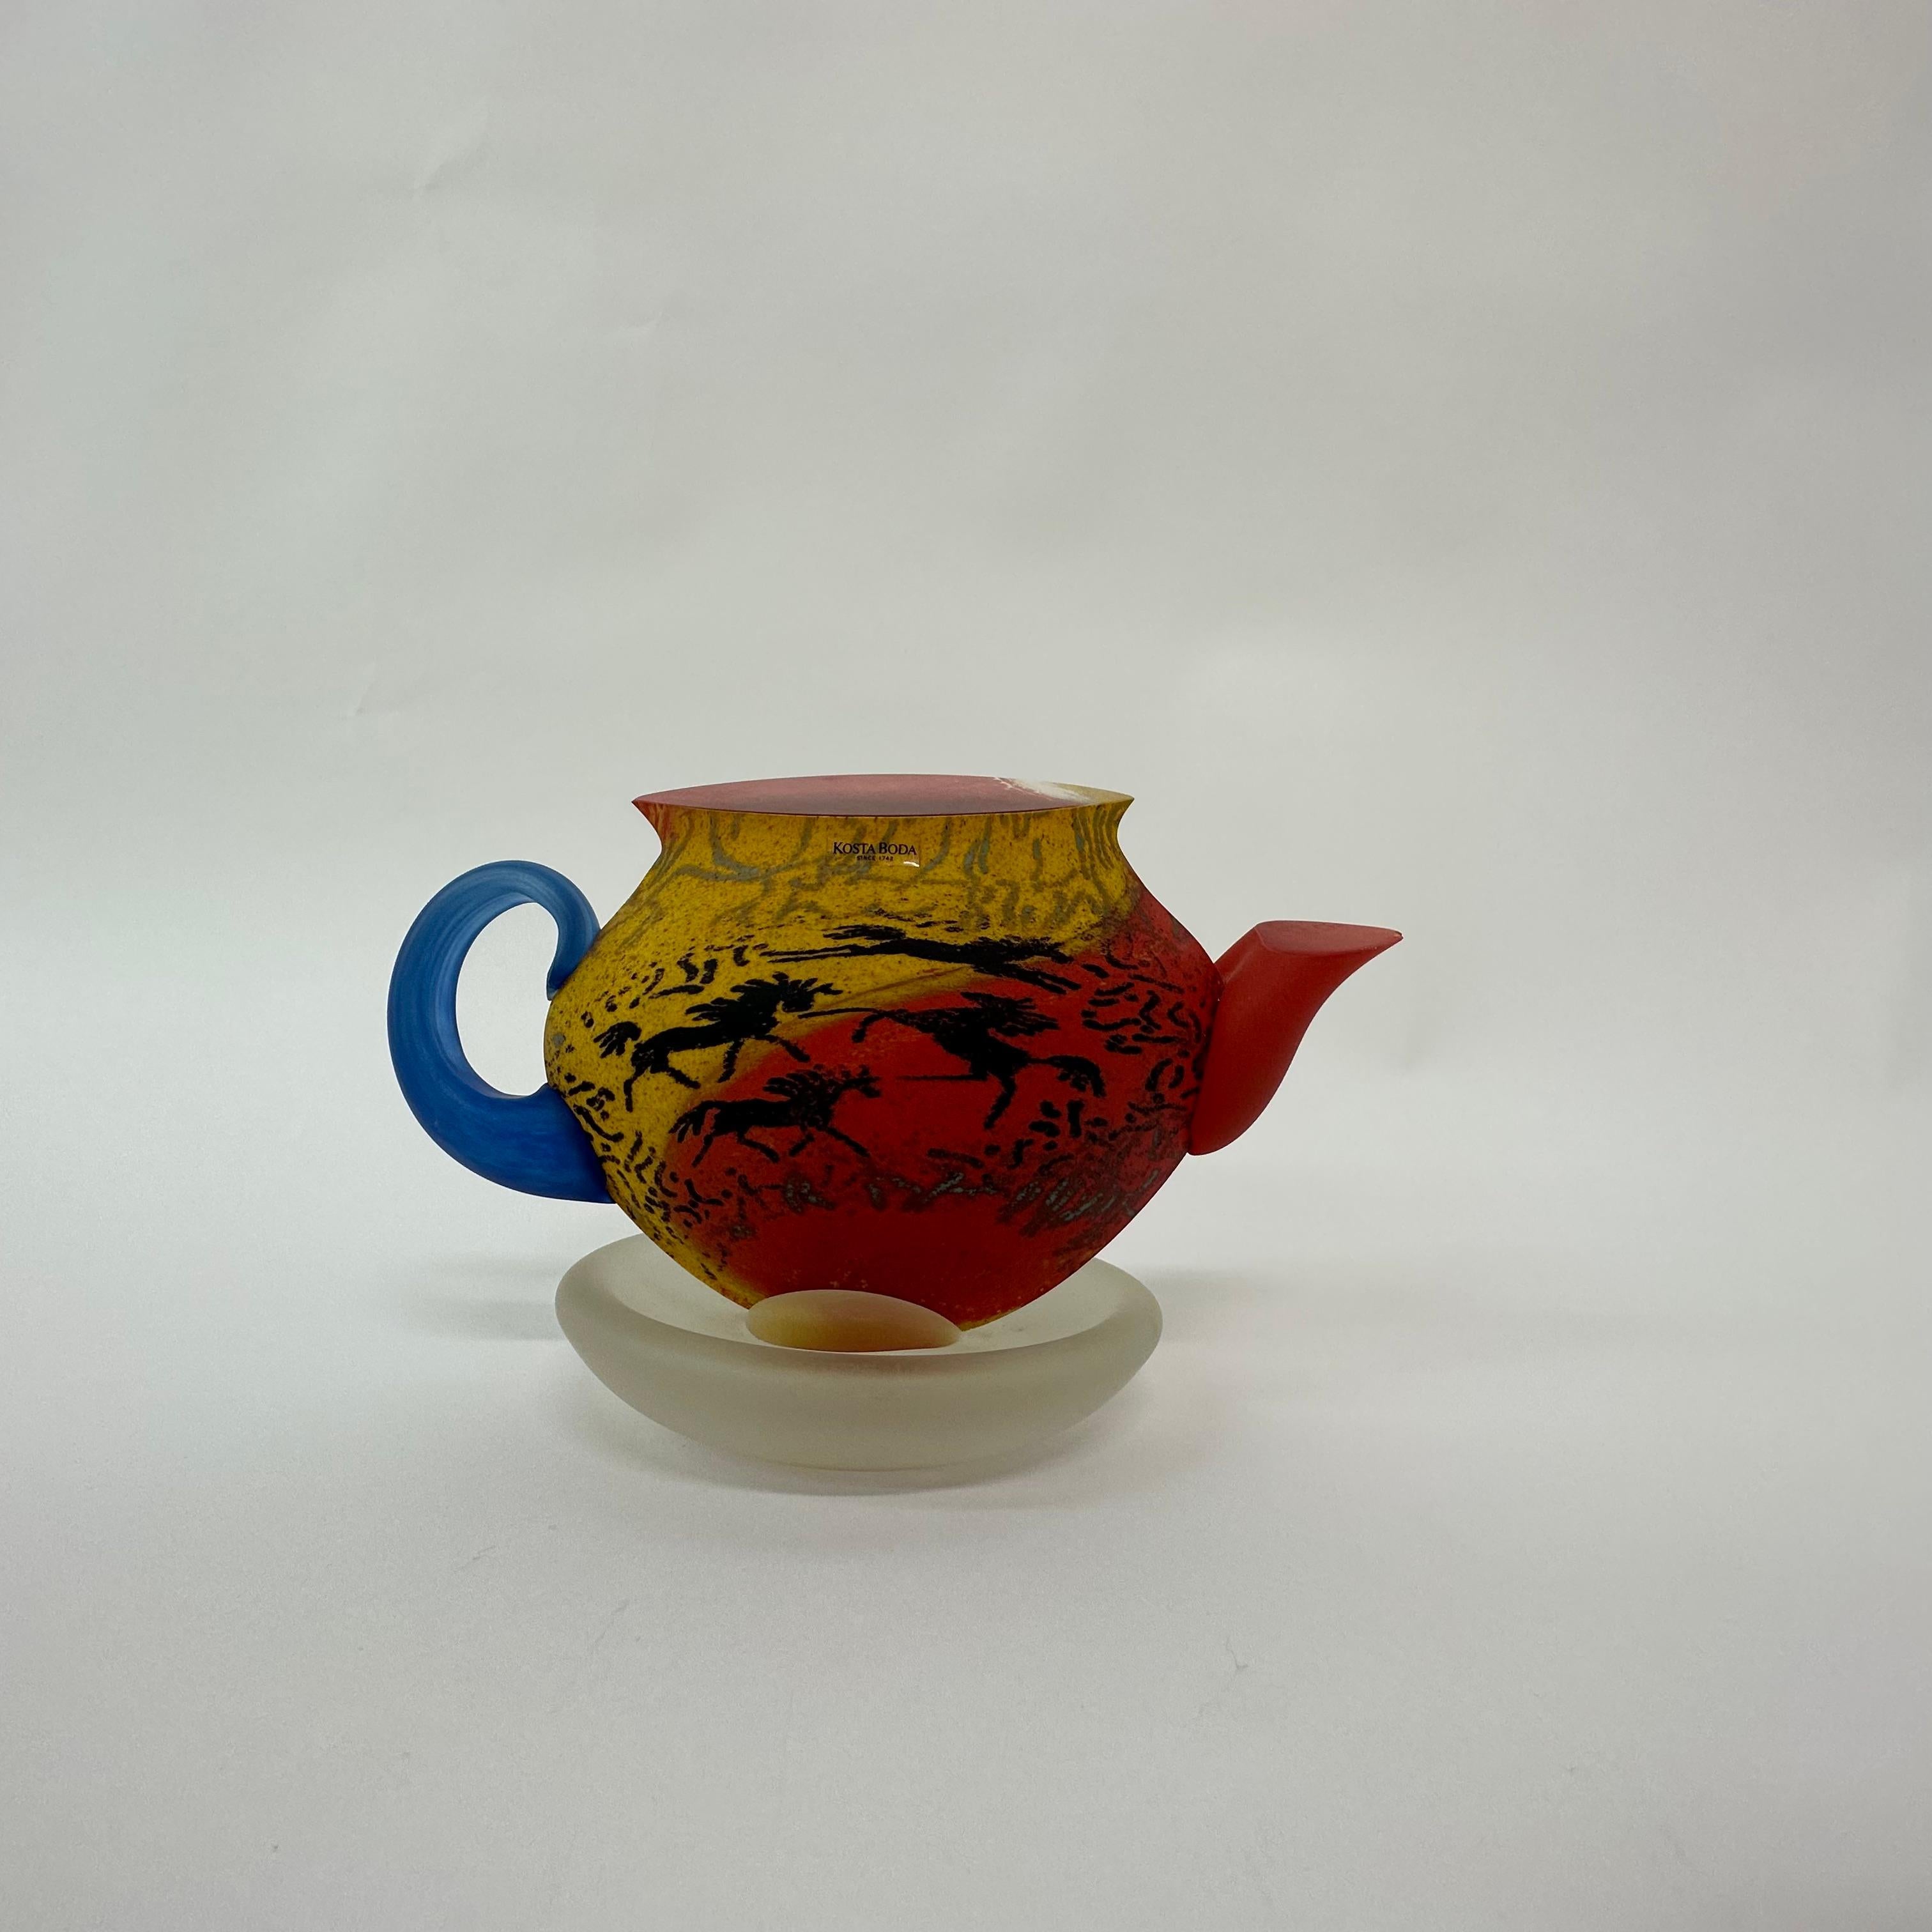 Dimensions: 25cm W, 15,5cmH, 14cm D
Condition: Good Has a small chip on the edge of the tip op the tea pot see photos 
Period:  1980’s
Origin: Sweden
Designer: Kjell Engman
Manufacturer: Kosta Boda